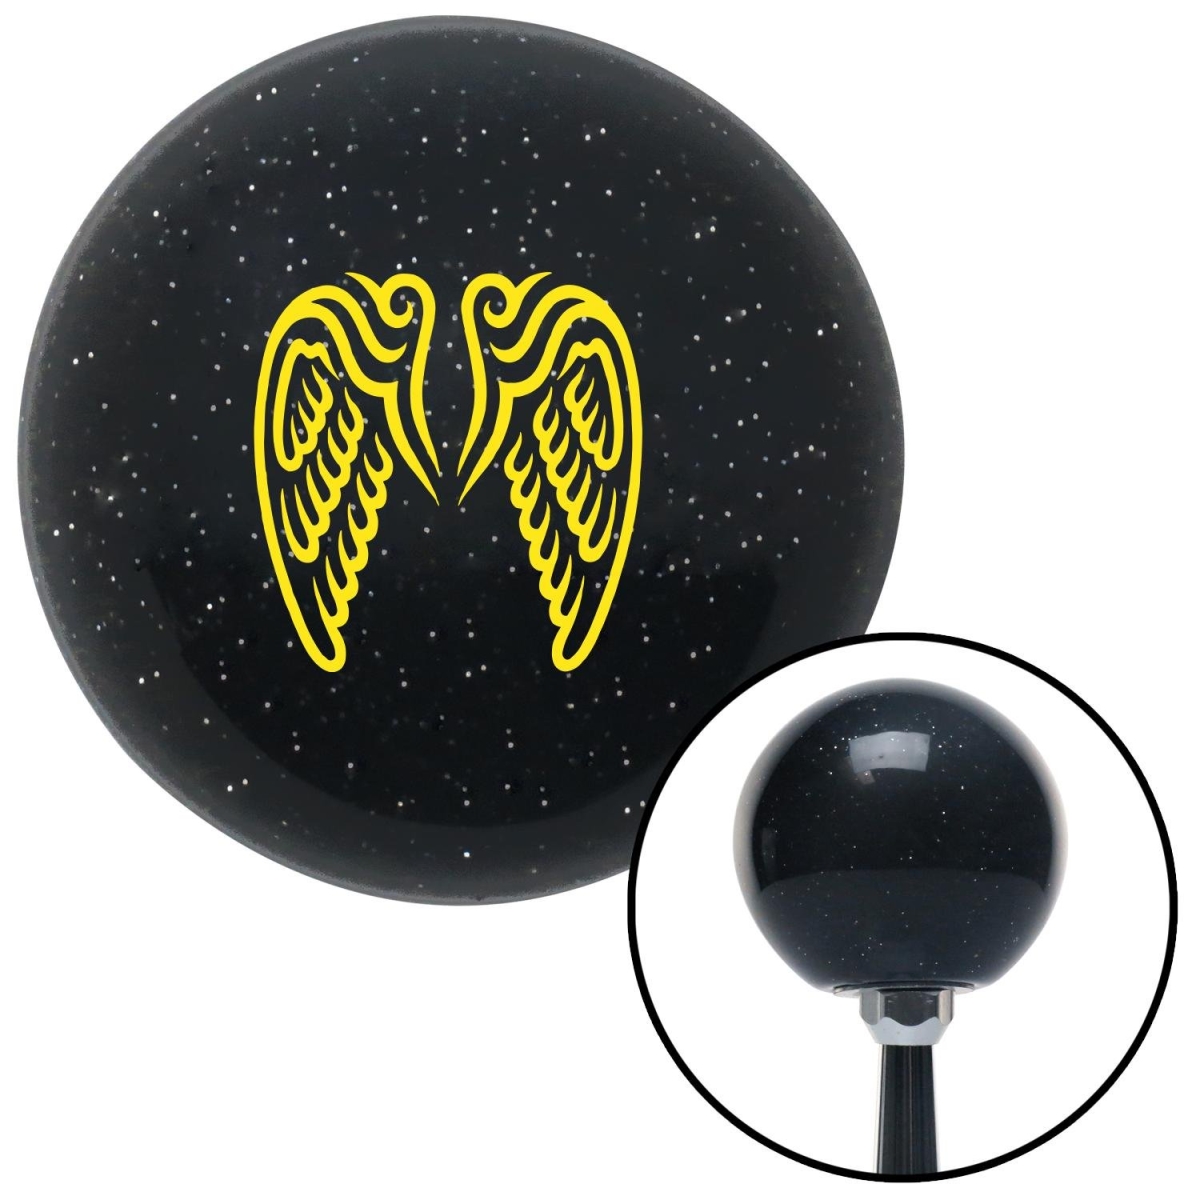 American Shifter 70521 Yellow Angel Wings Black Metal Flake Shift Knob with M16 x 1.5 Insert Shifter Auto -  American Shifter Company